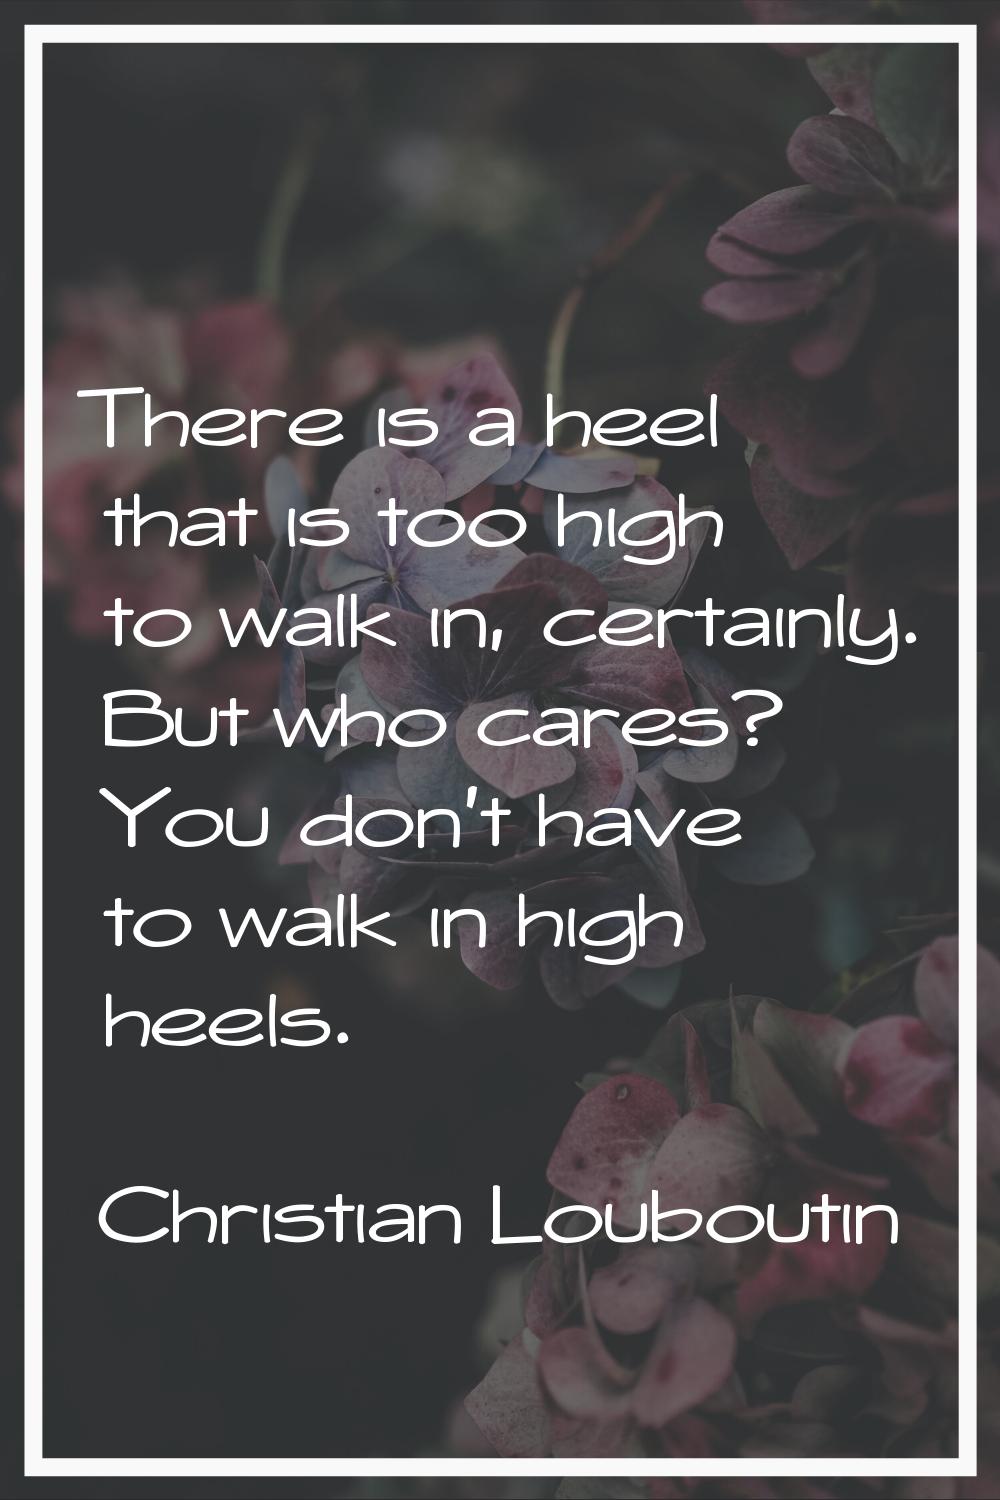 There is a heel that is too high to walk in, certainly. But who cares? You don't have to walk in hi